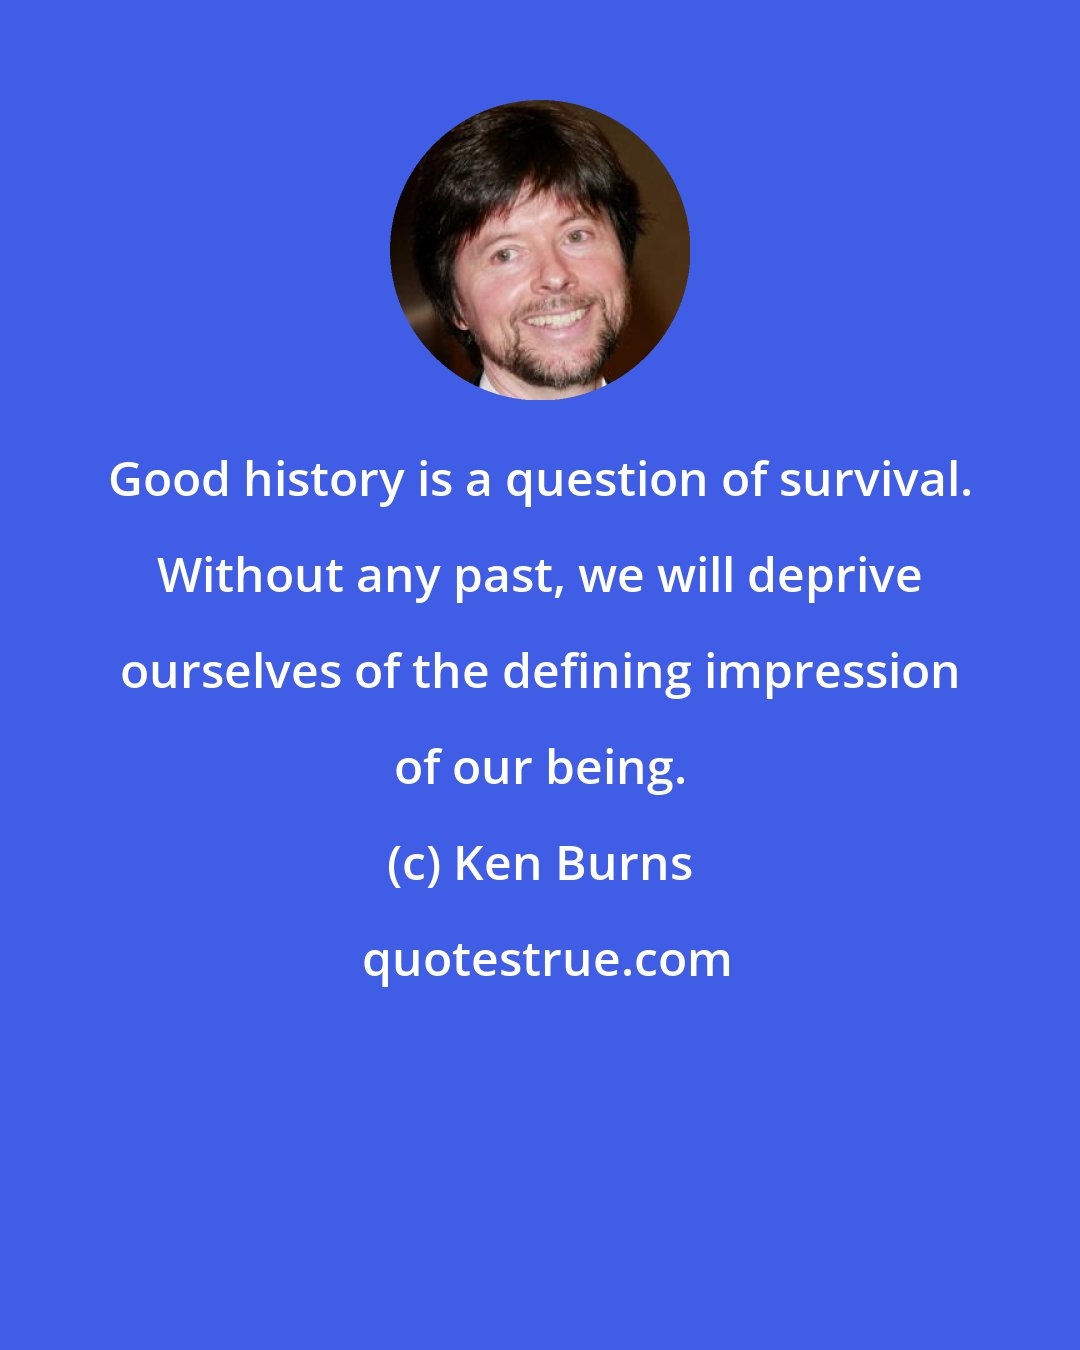 Ken Burns: Good history is a question of survival. Without any past, we will deprive ourselves of the defining impression of our being.